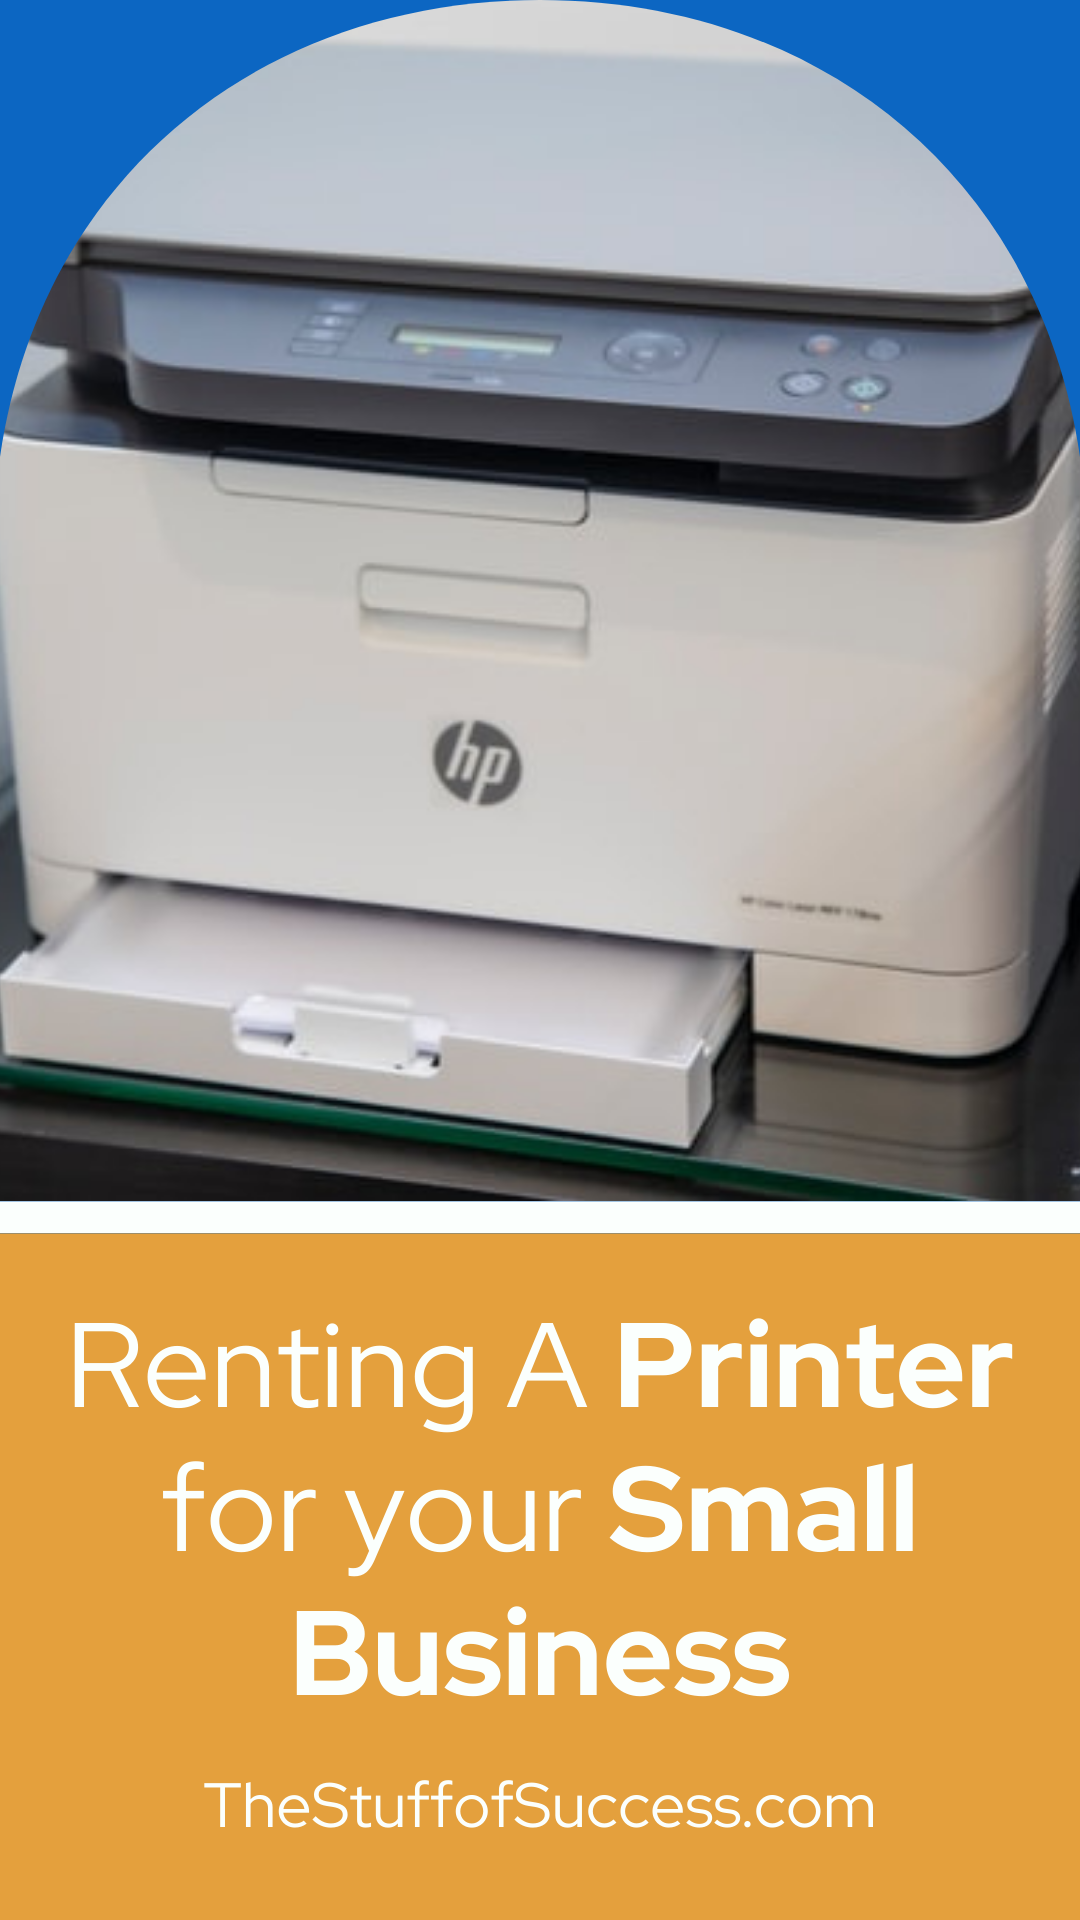 Renting A Printer for your Small Business